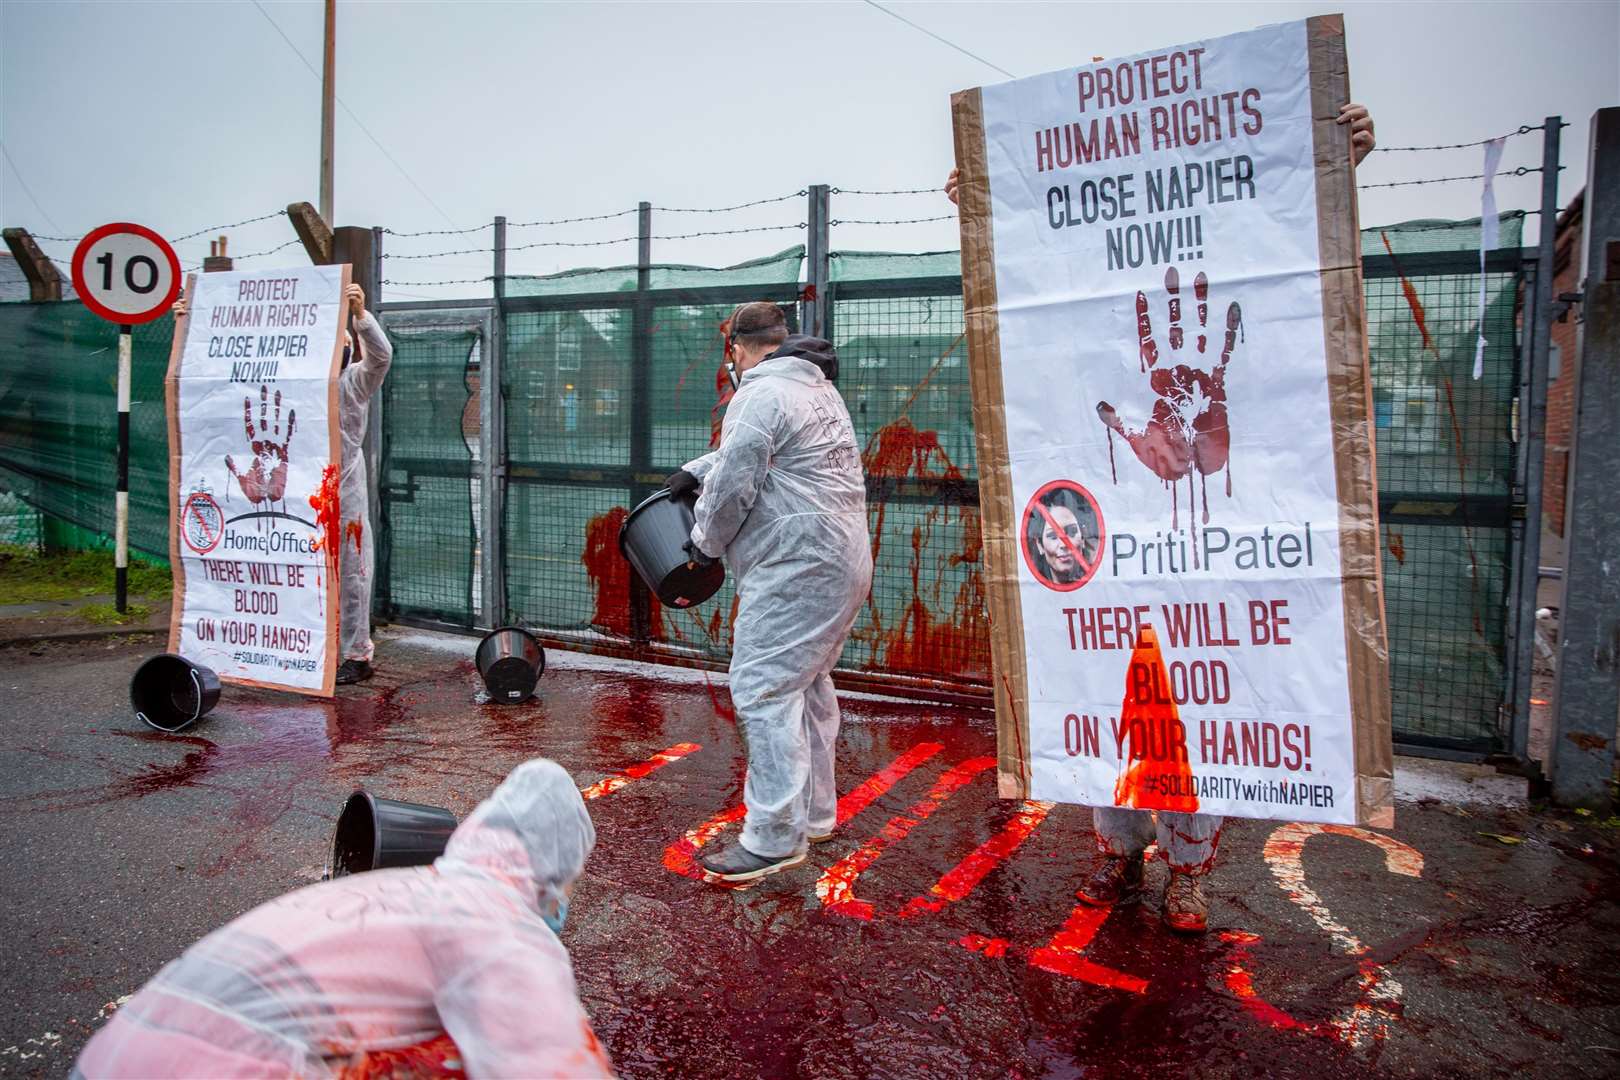 Activists protesting outside the gates earlier this year. Photo by Andrew Aitchison/In Pictures via Getty Images